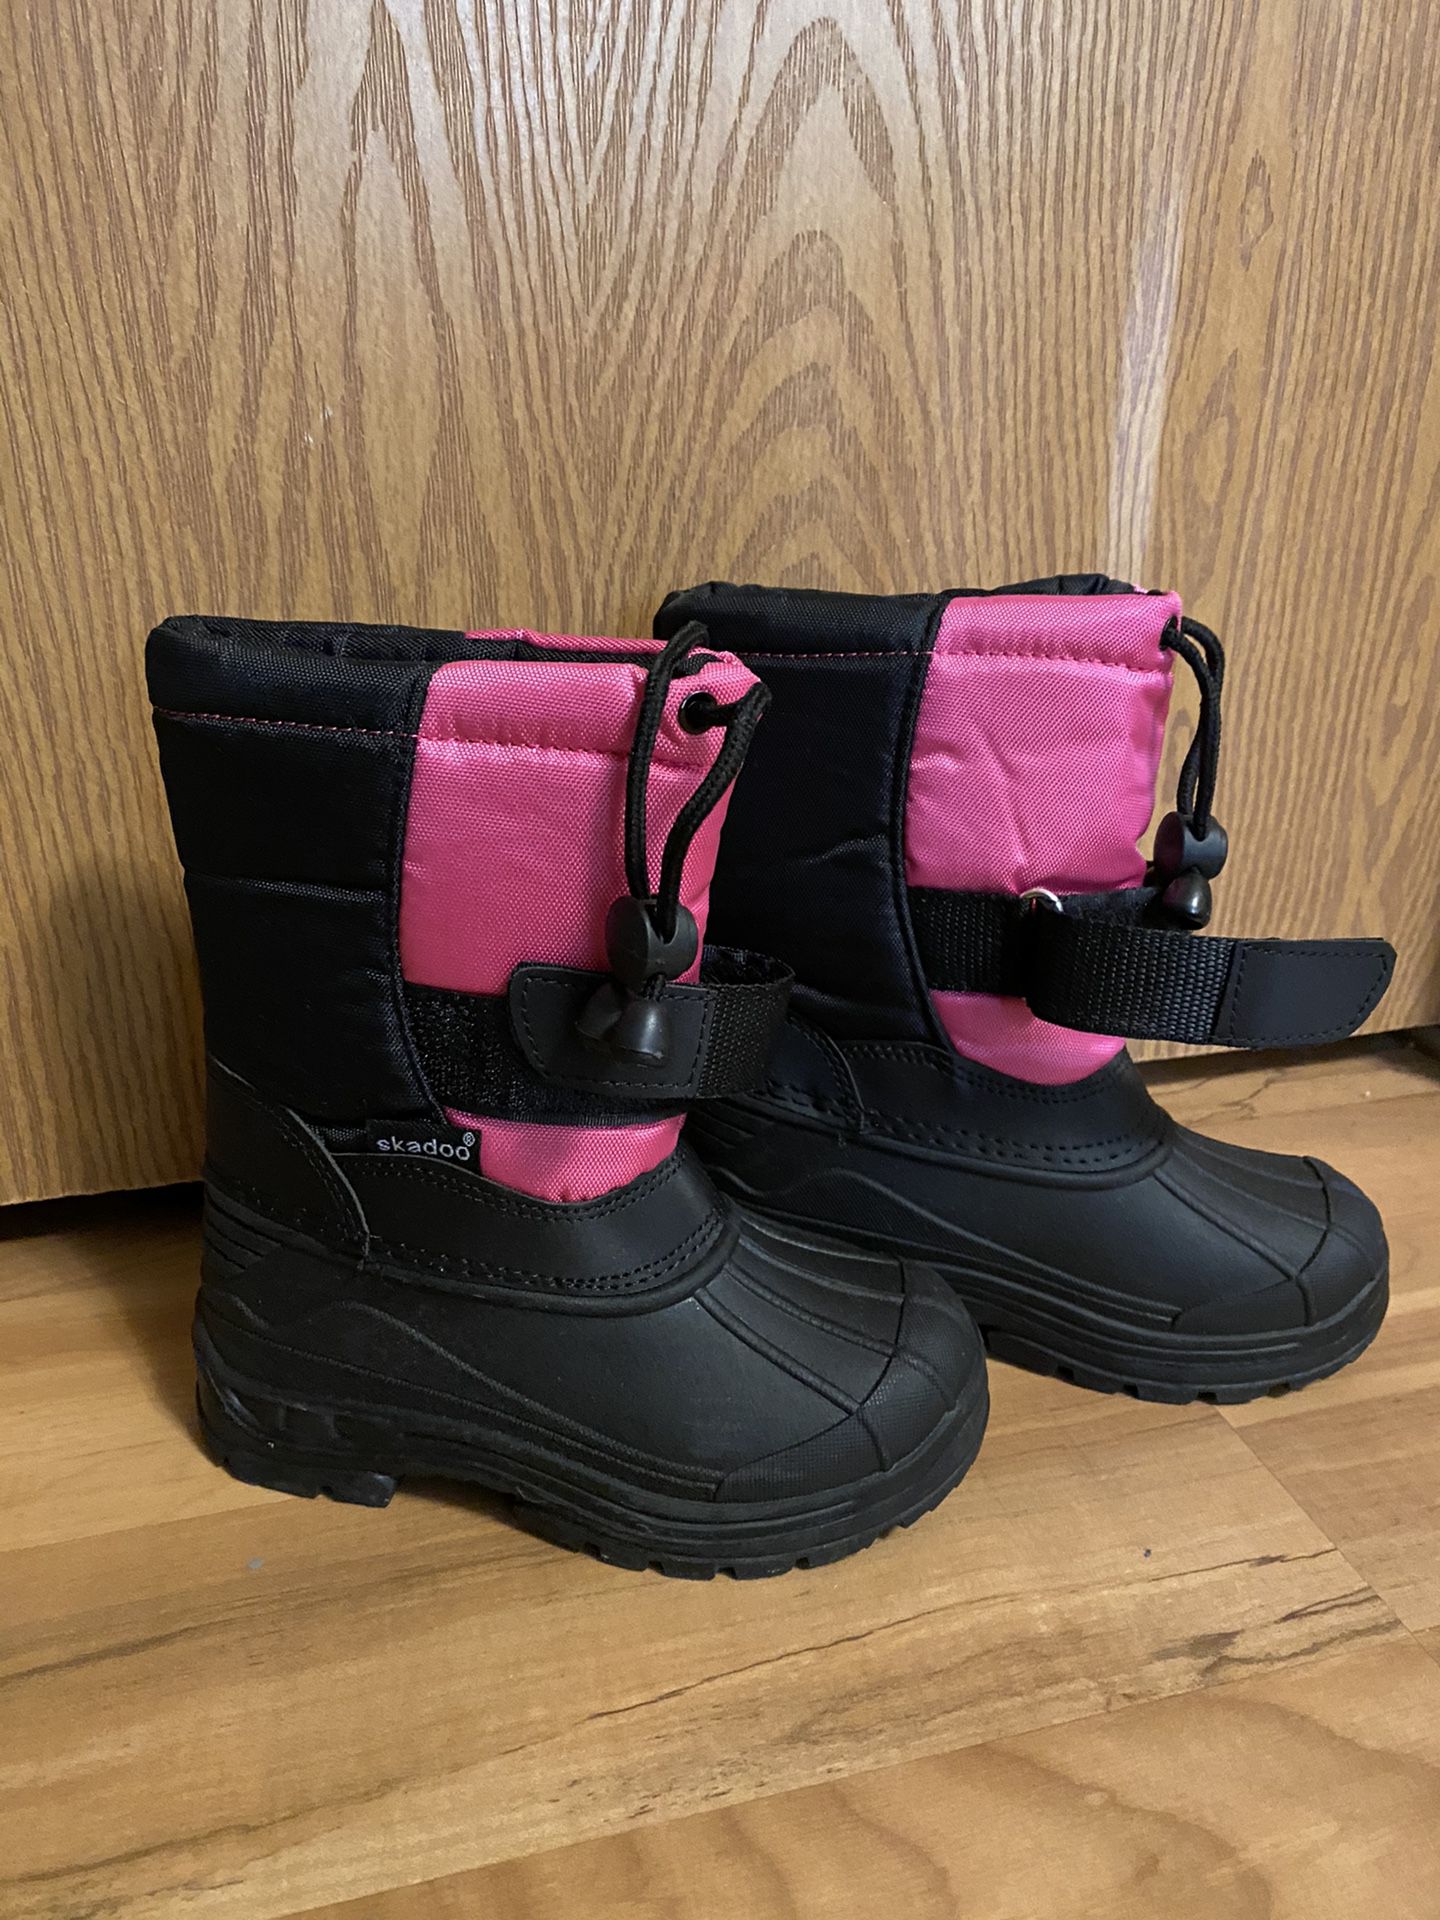 Toddler girls size 8 waterproof snow boots Brand New